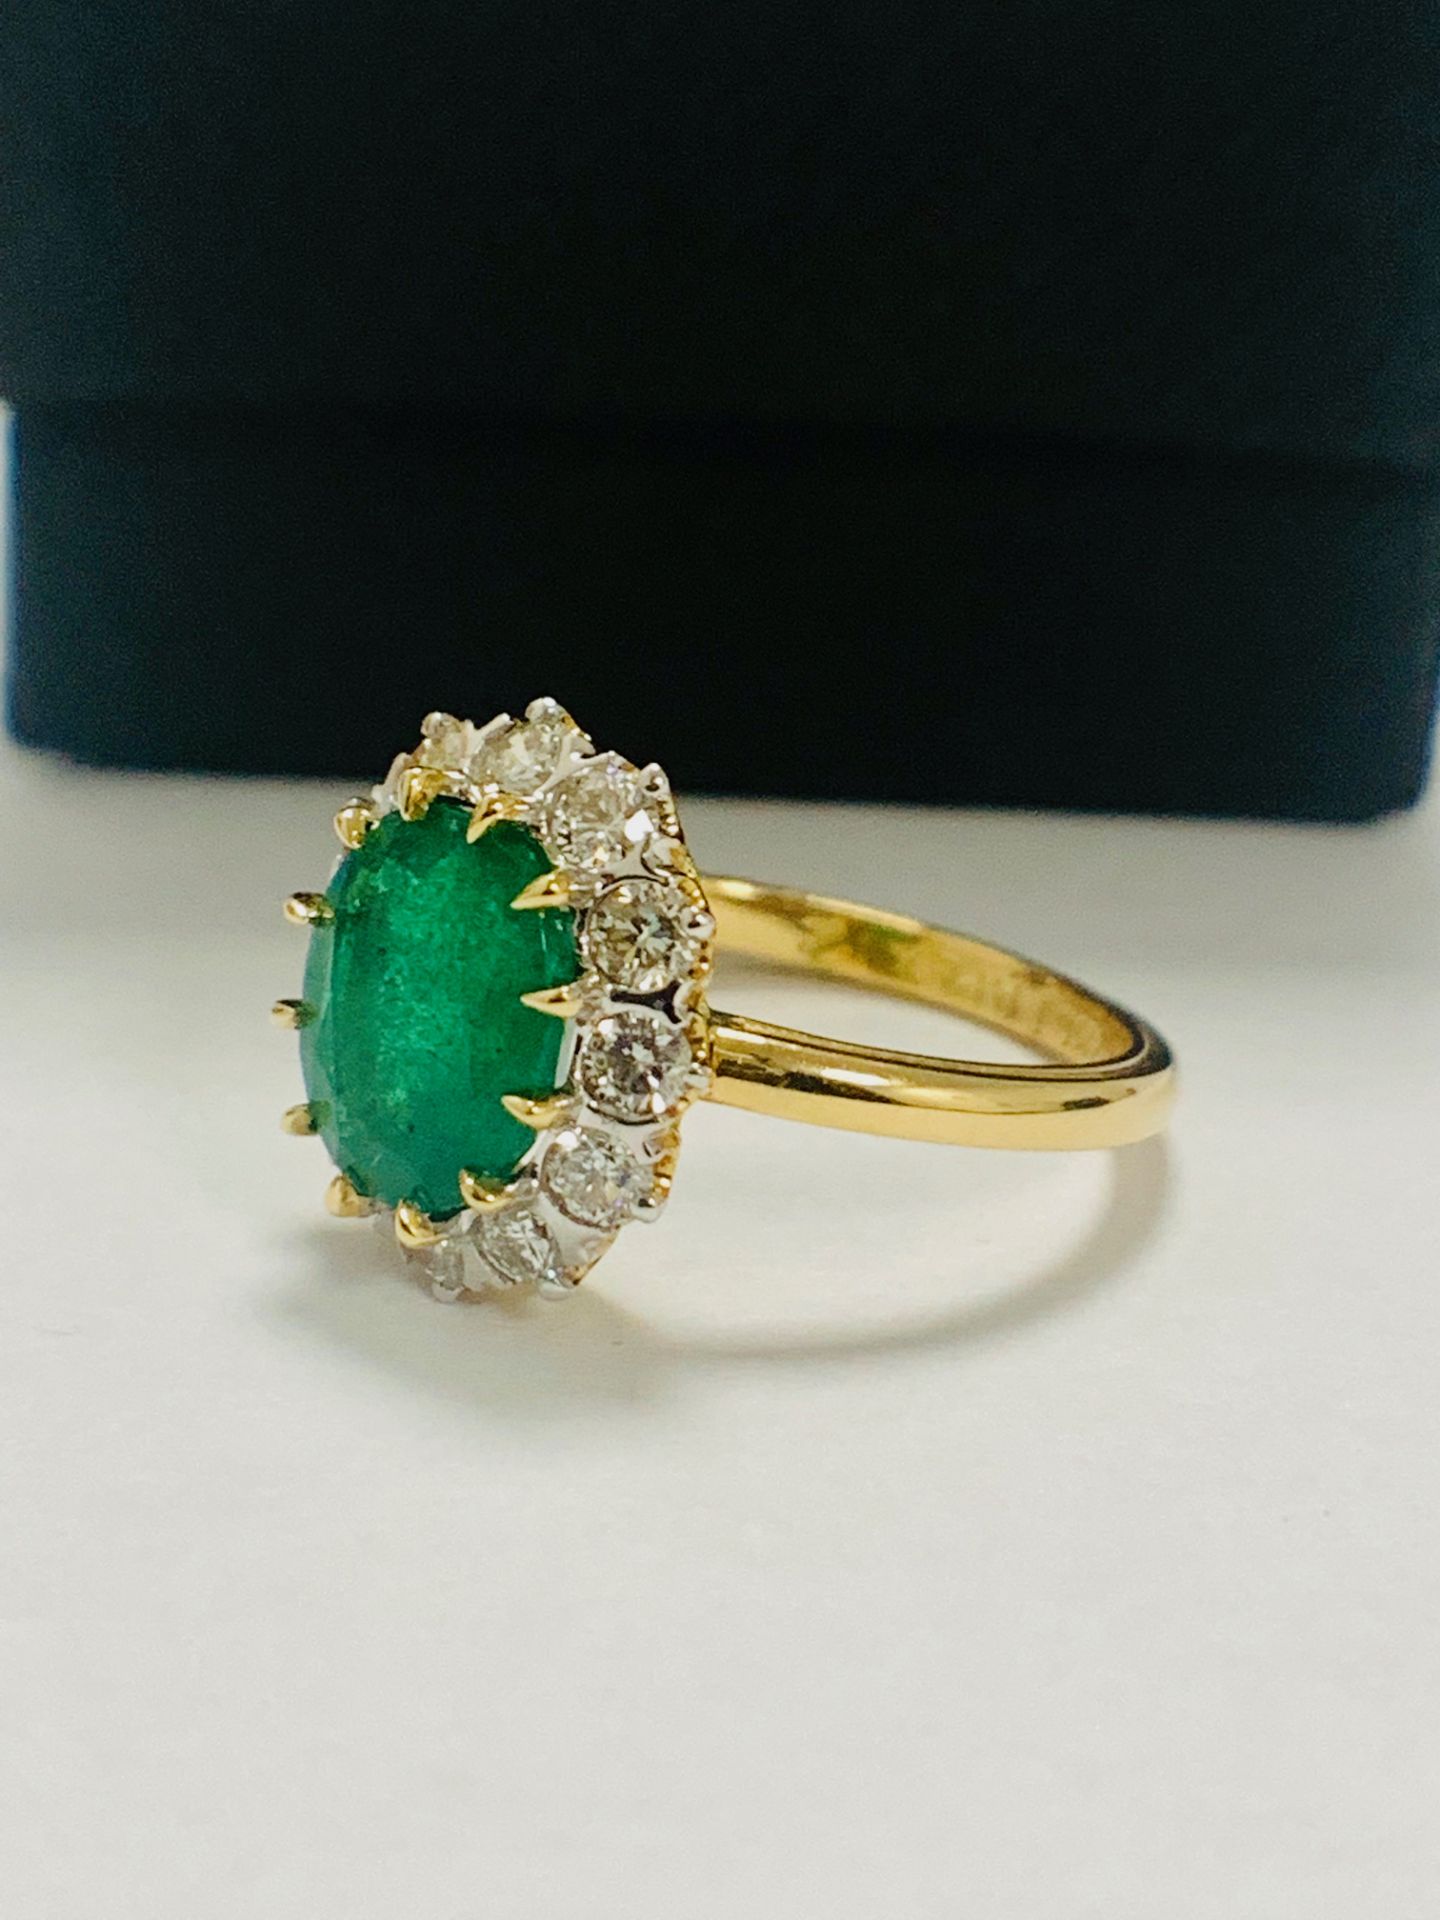 14ct Yellow Gold Emerald and Diamond Ring Featuring Centre, Oval Cut, Dark Green Emerald - Image 2 of 12